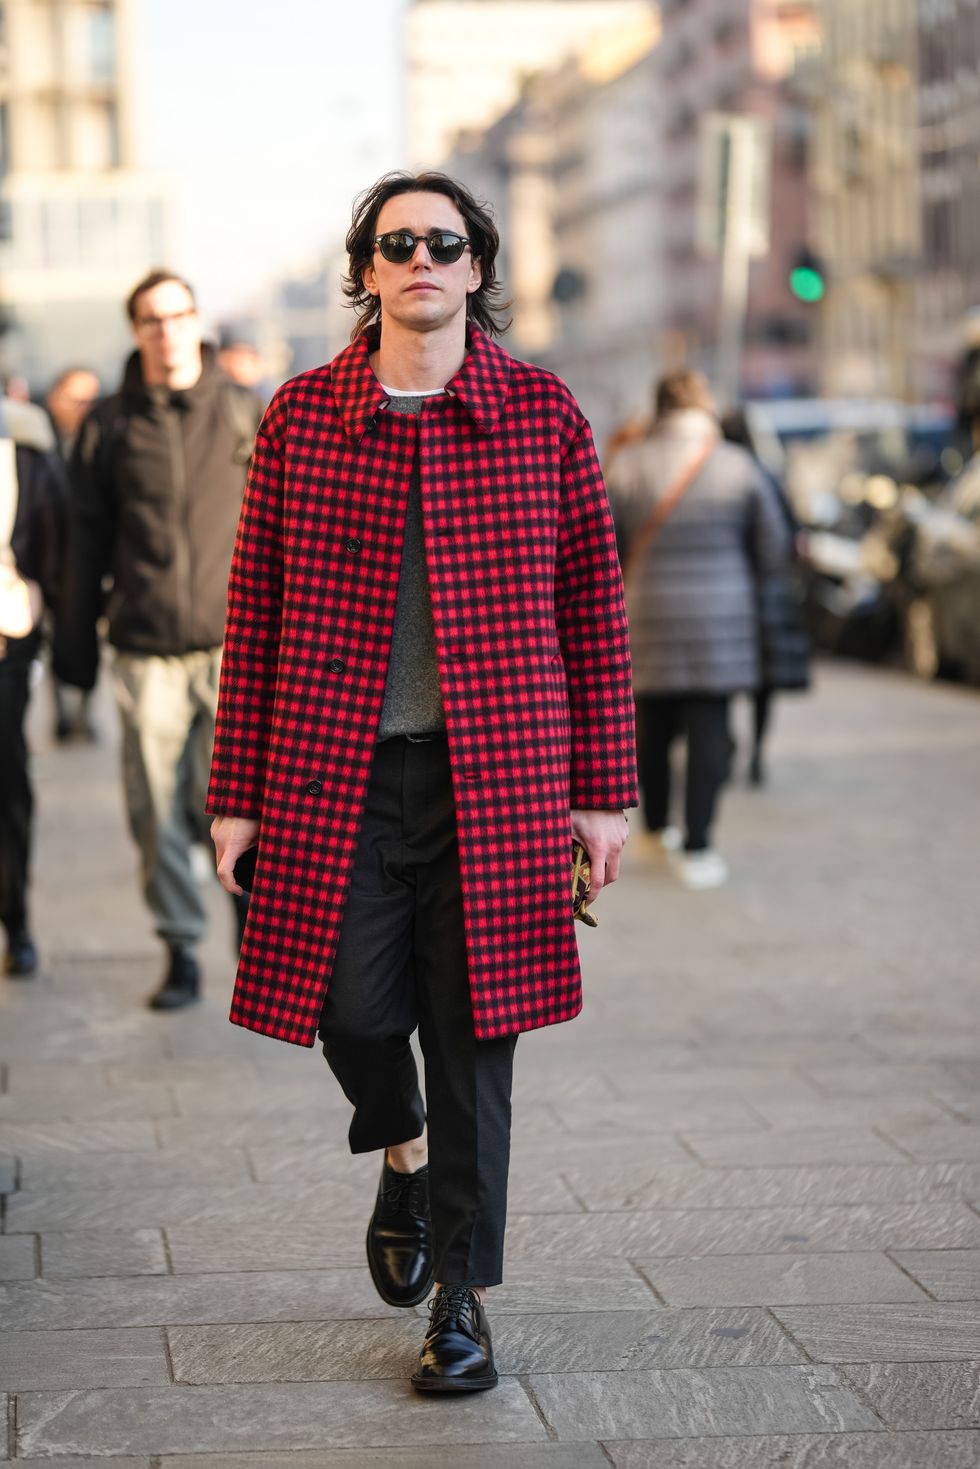 The Only Winter Coat You Need, According to Milan’s Most Stylish Men